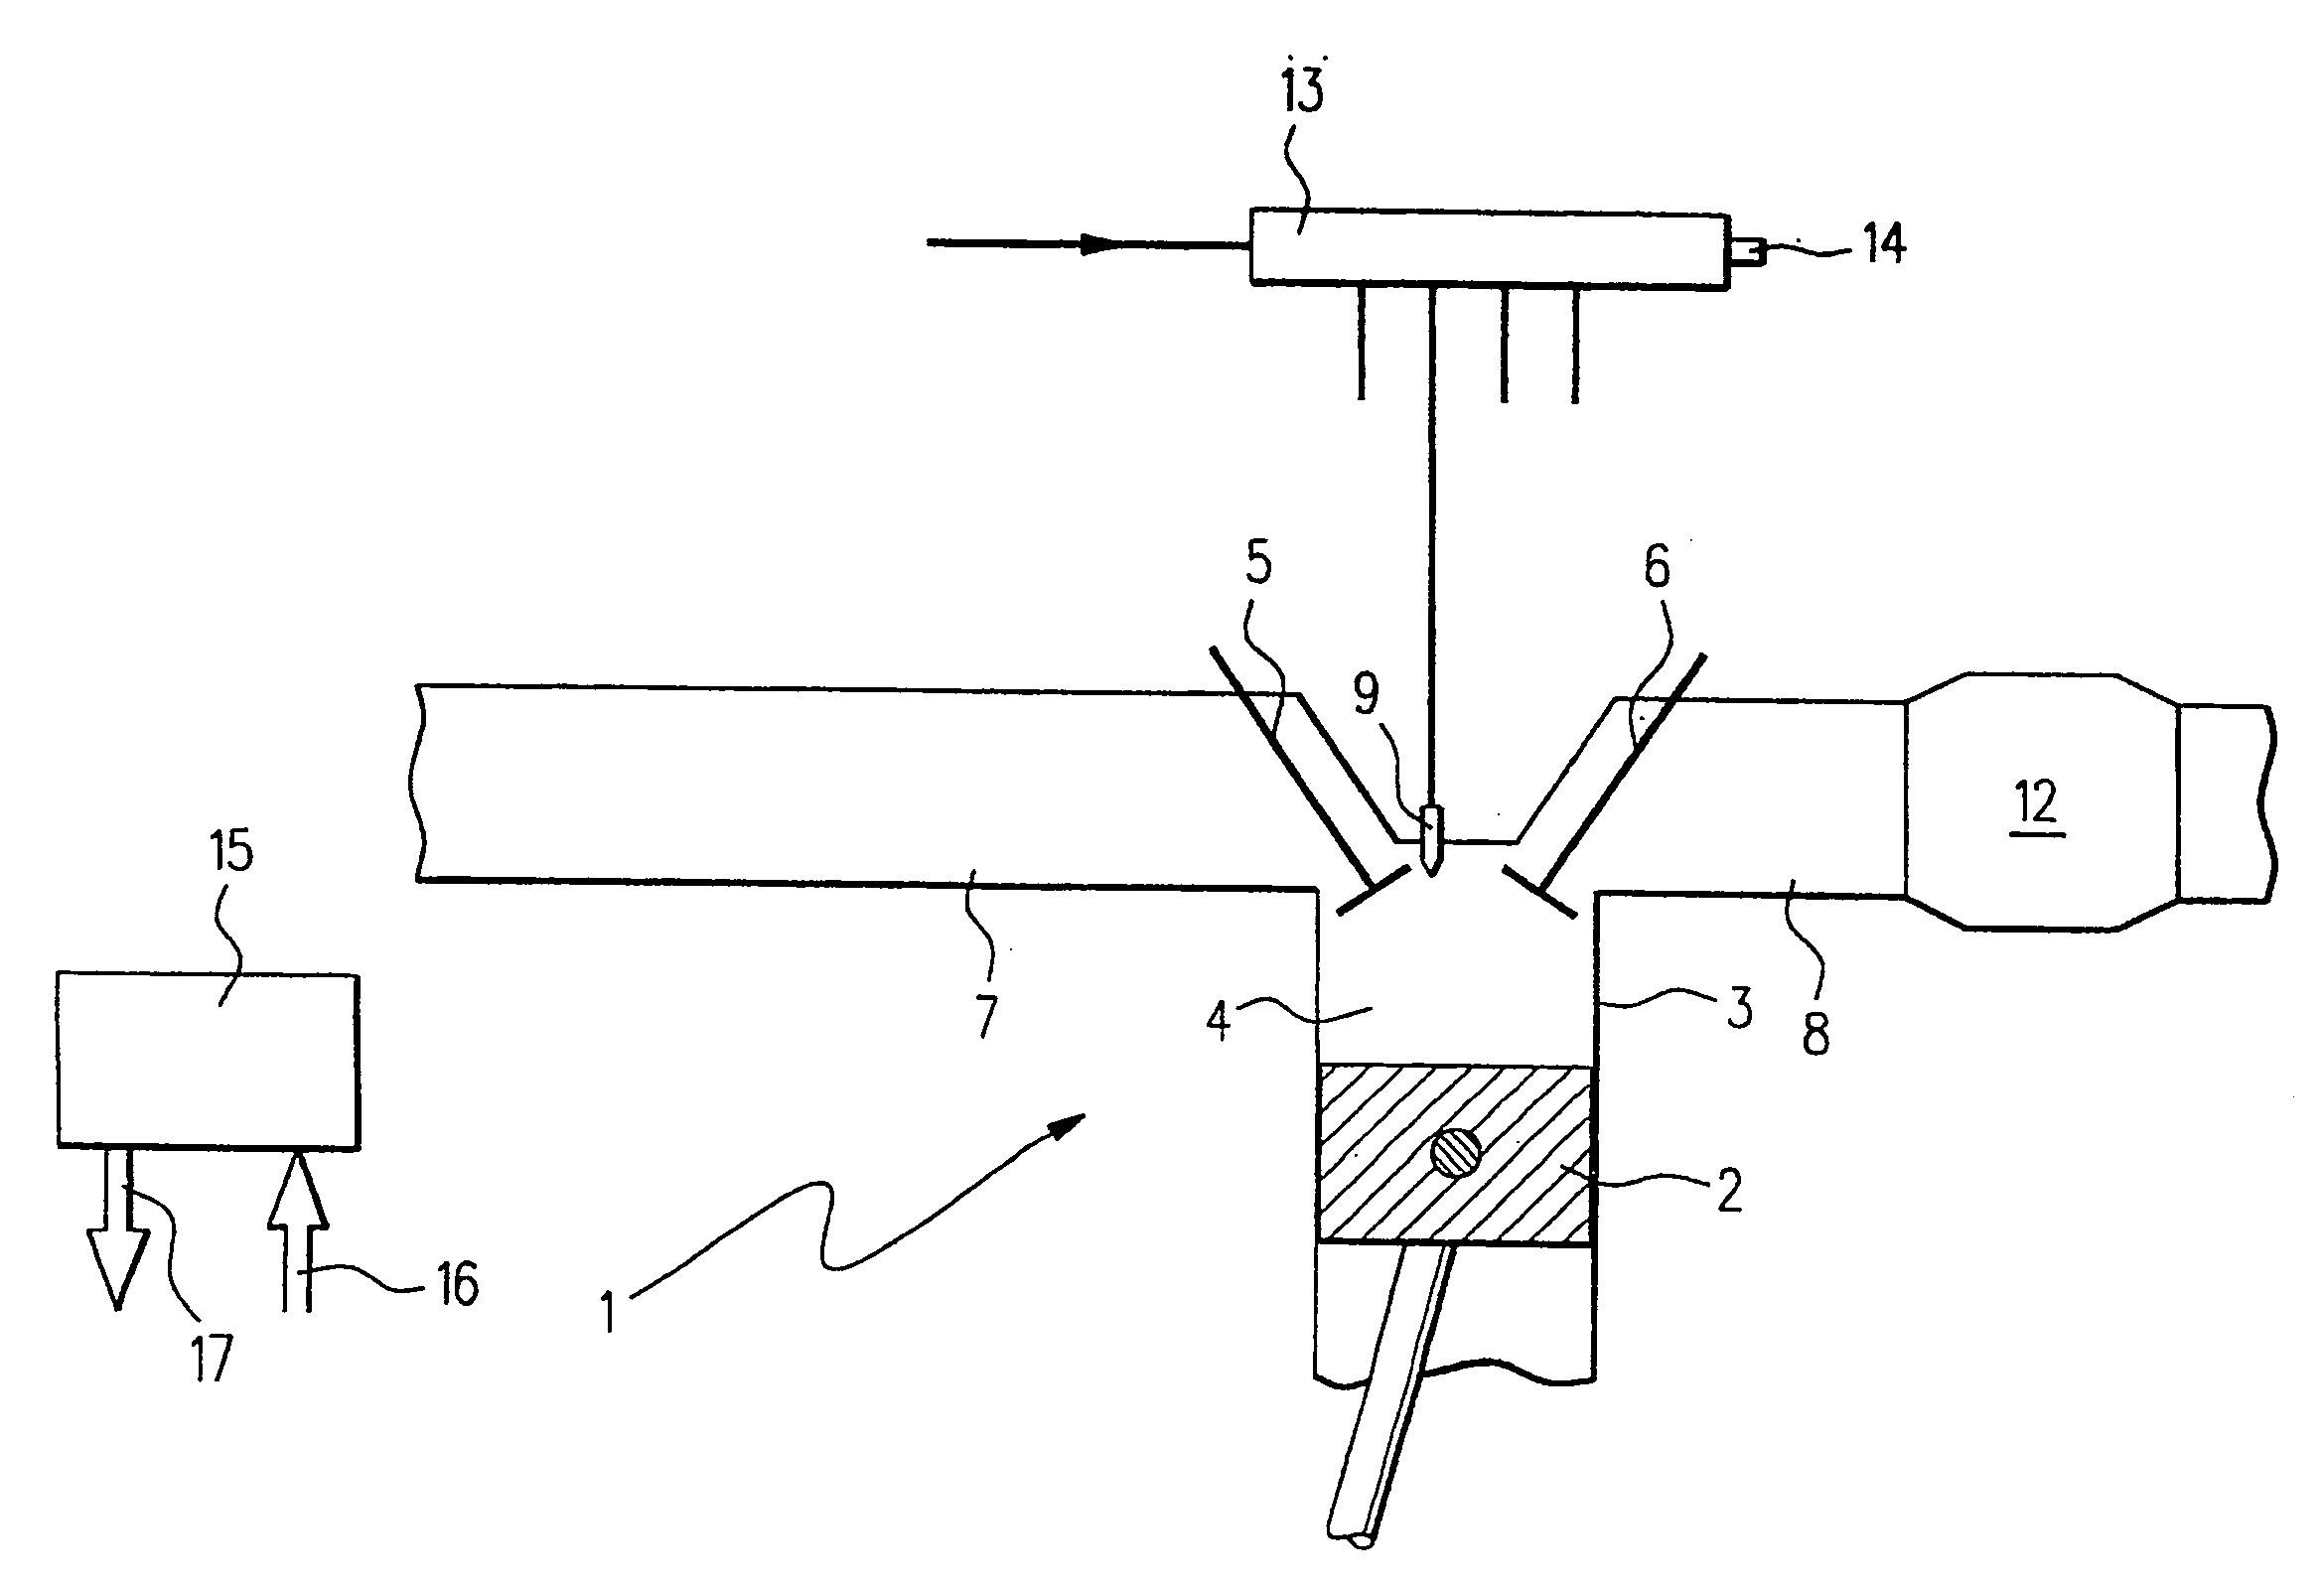 Method For Operating An Internal Combustion Engine, Taking Into Consideration The Individual Properties Of The Injection Devices